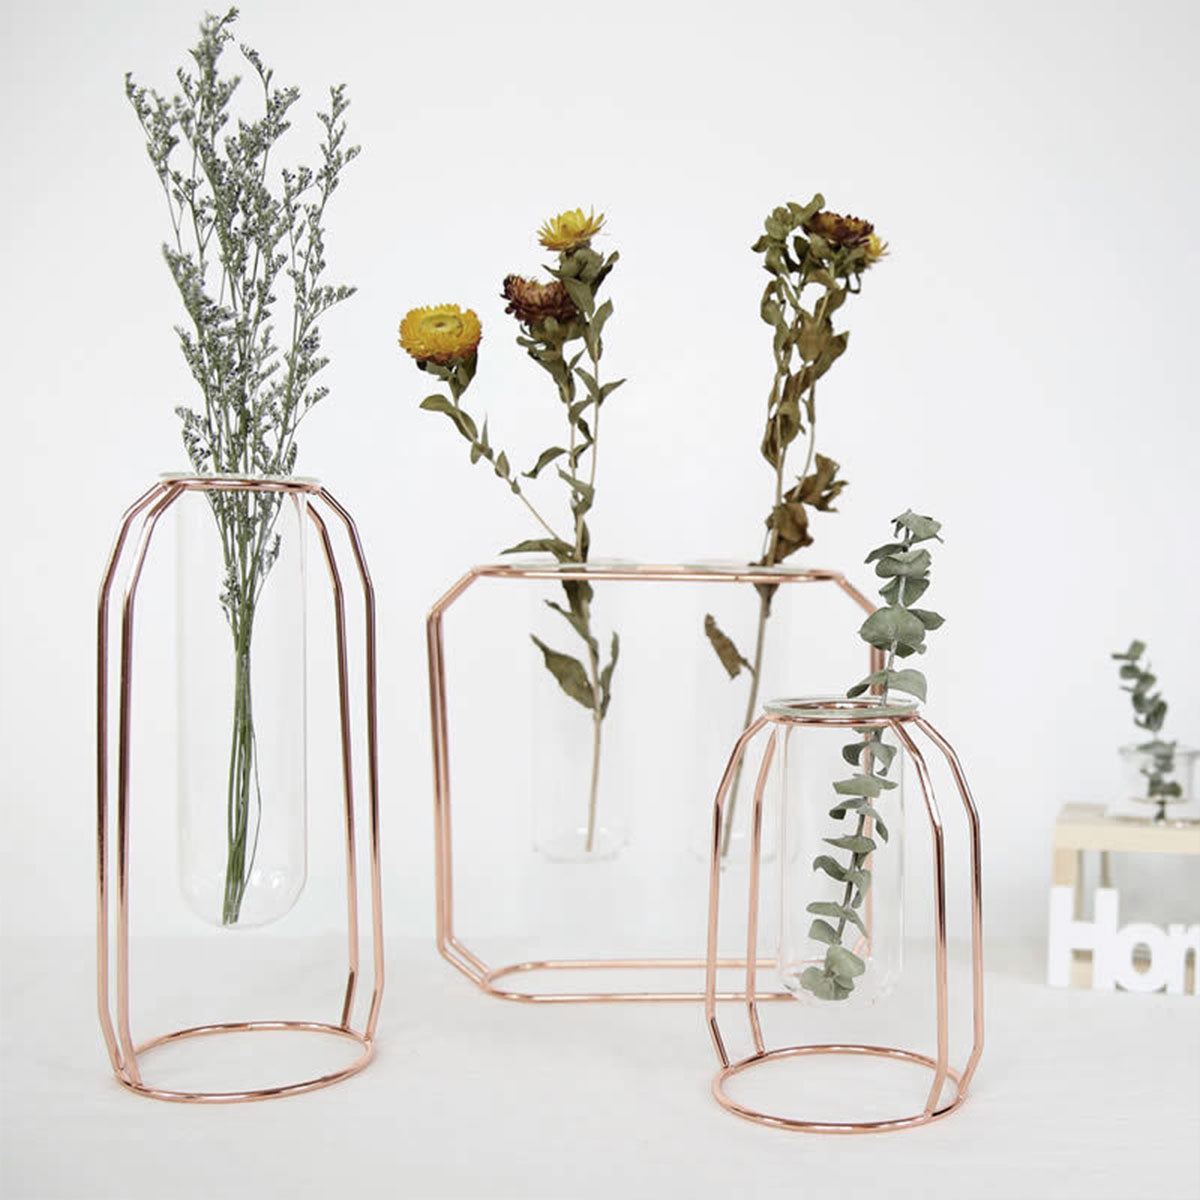 Hydroponic Vase for Home Decor with Iron Holder